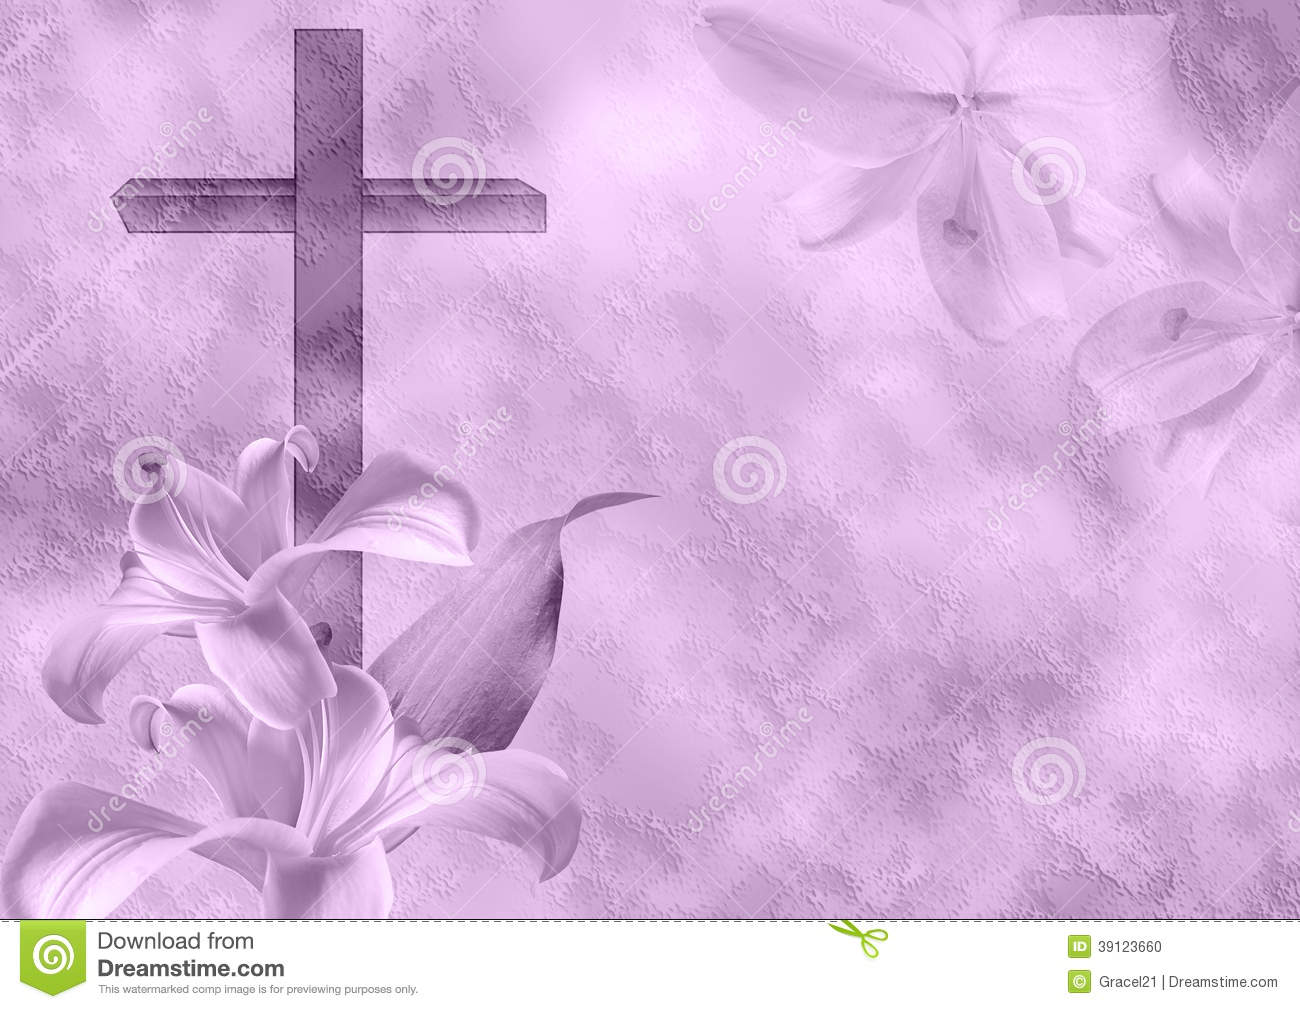 Cross And Lily Flower On Purple Background Mr No Pr No 2 829 2